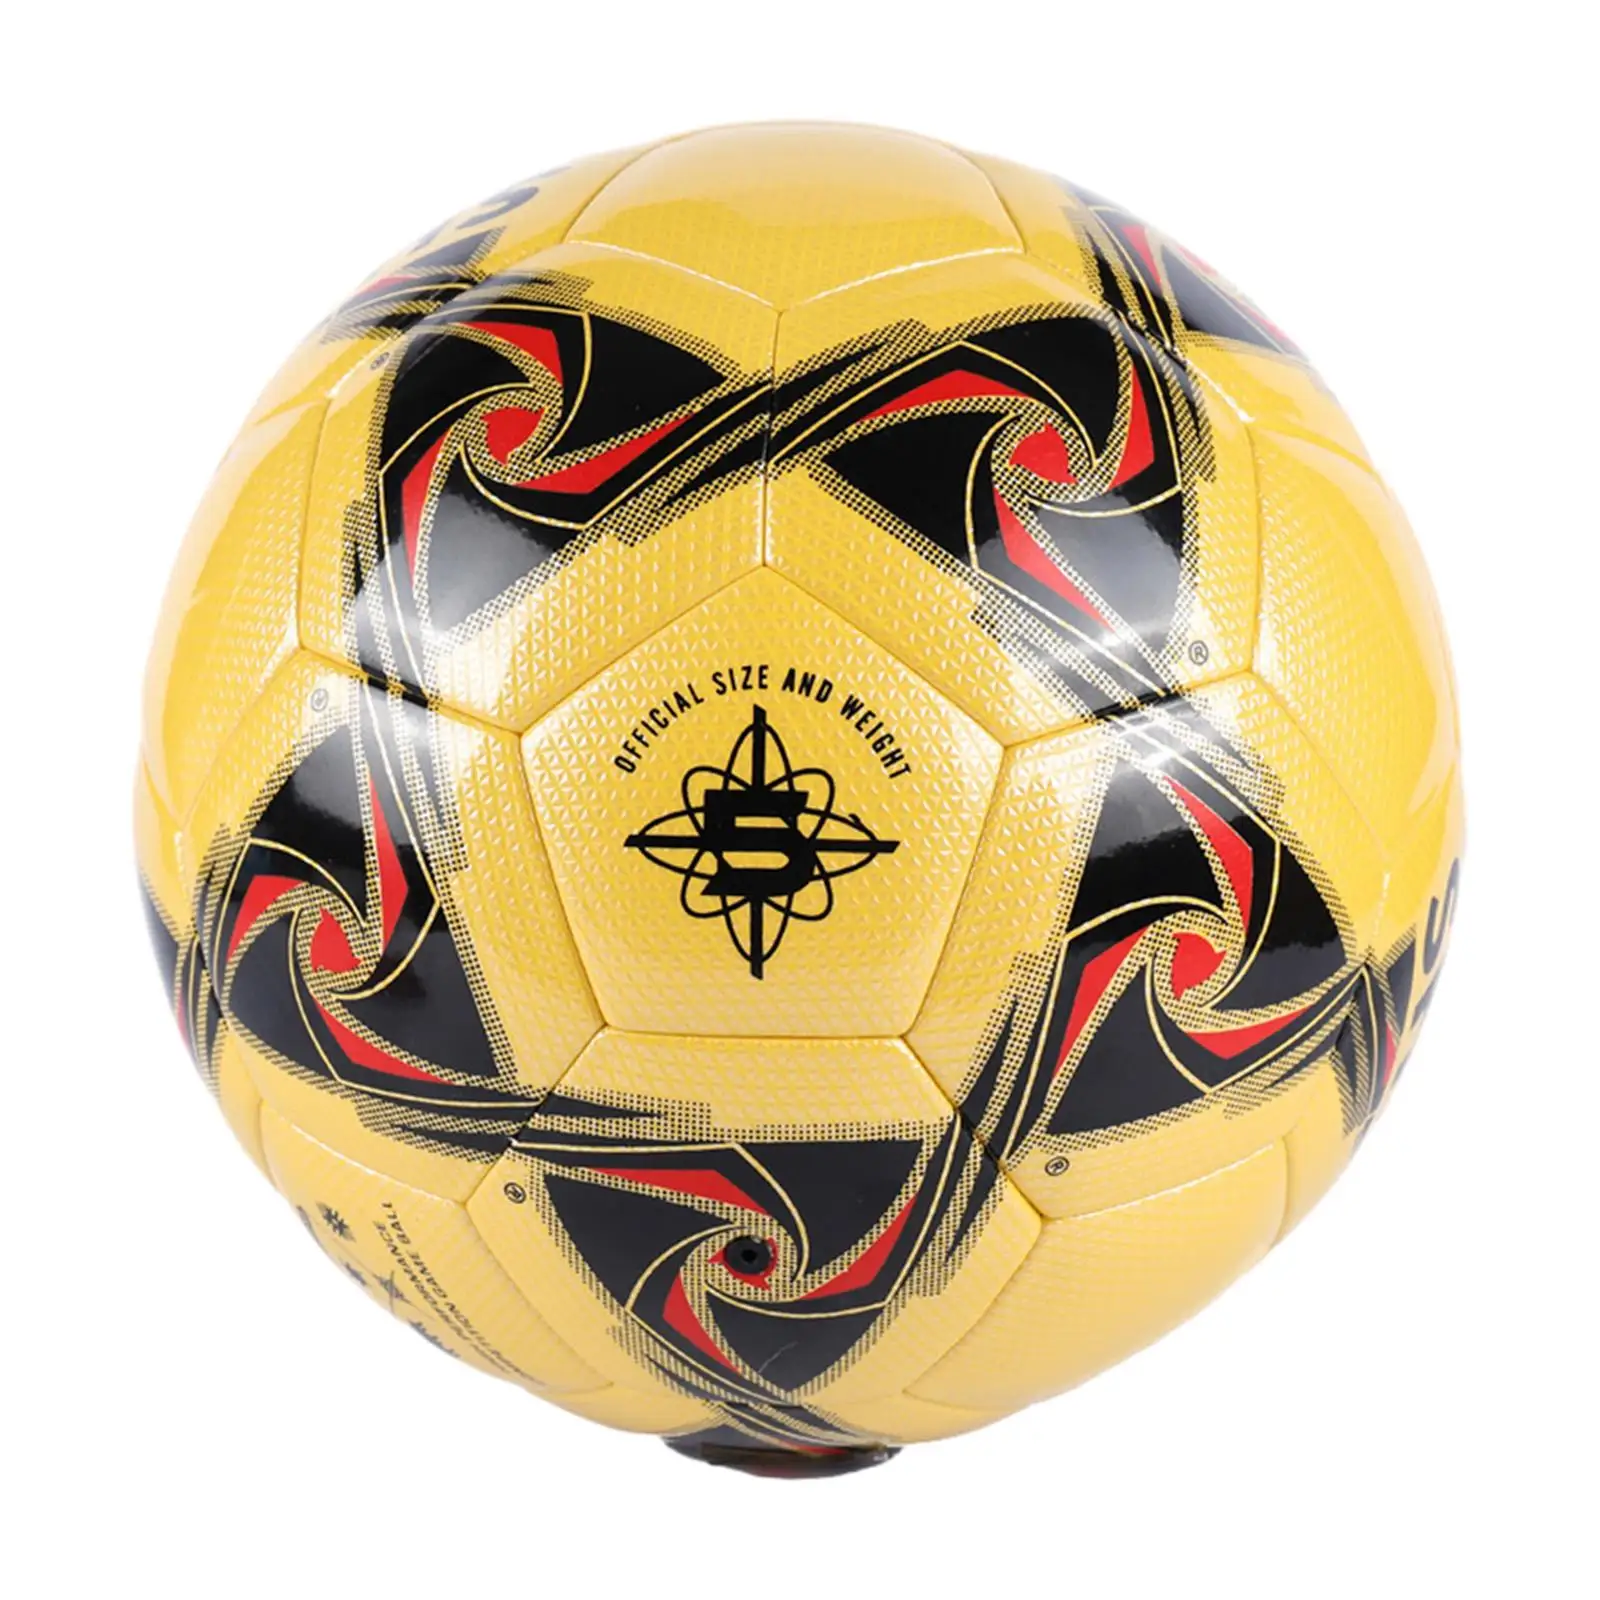 Soccer Ball Wear Resistant Durable for Child Boys and Girls Kids and Adults